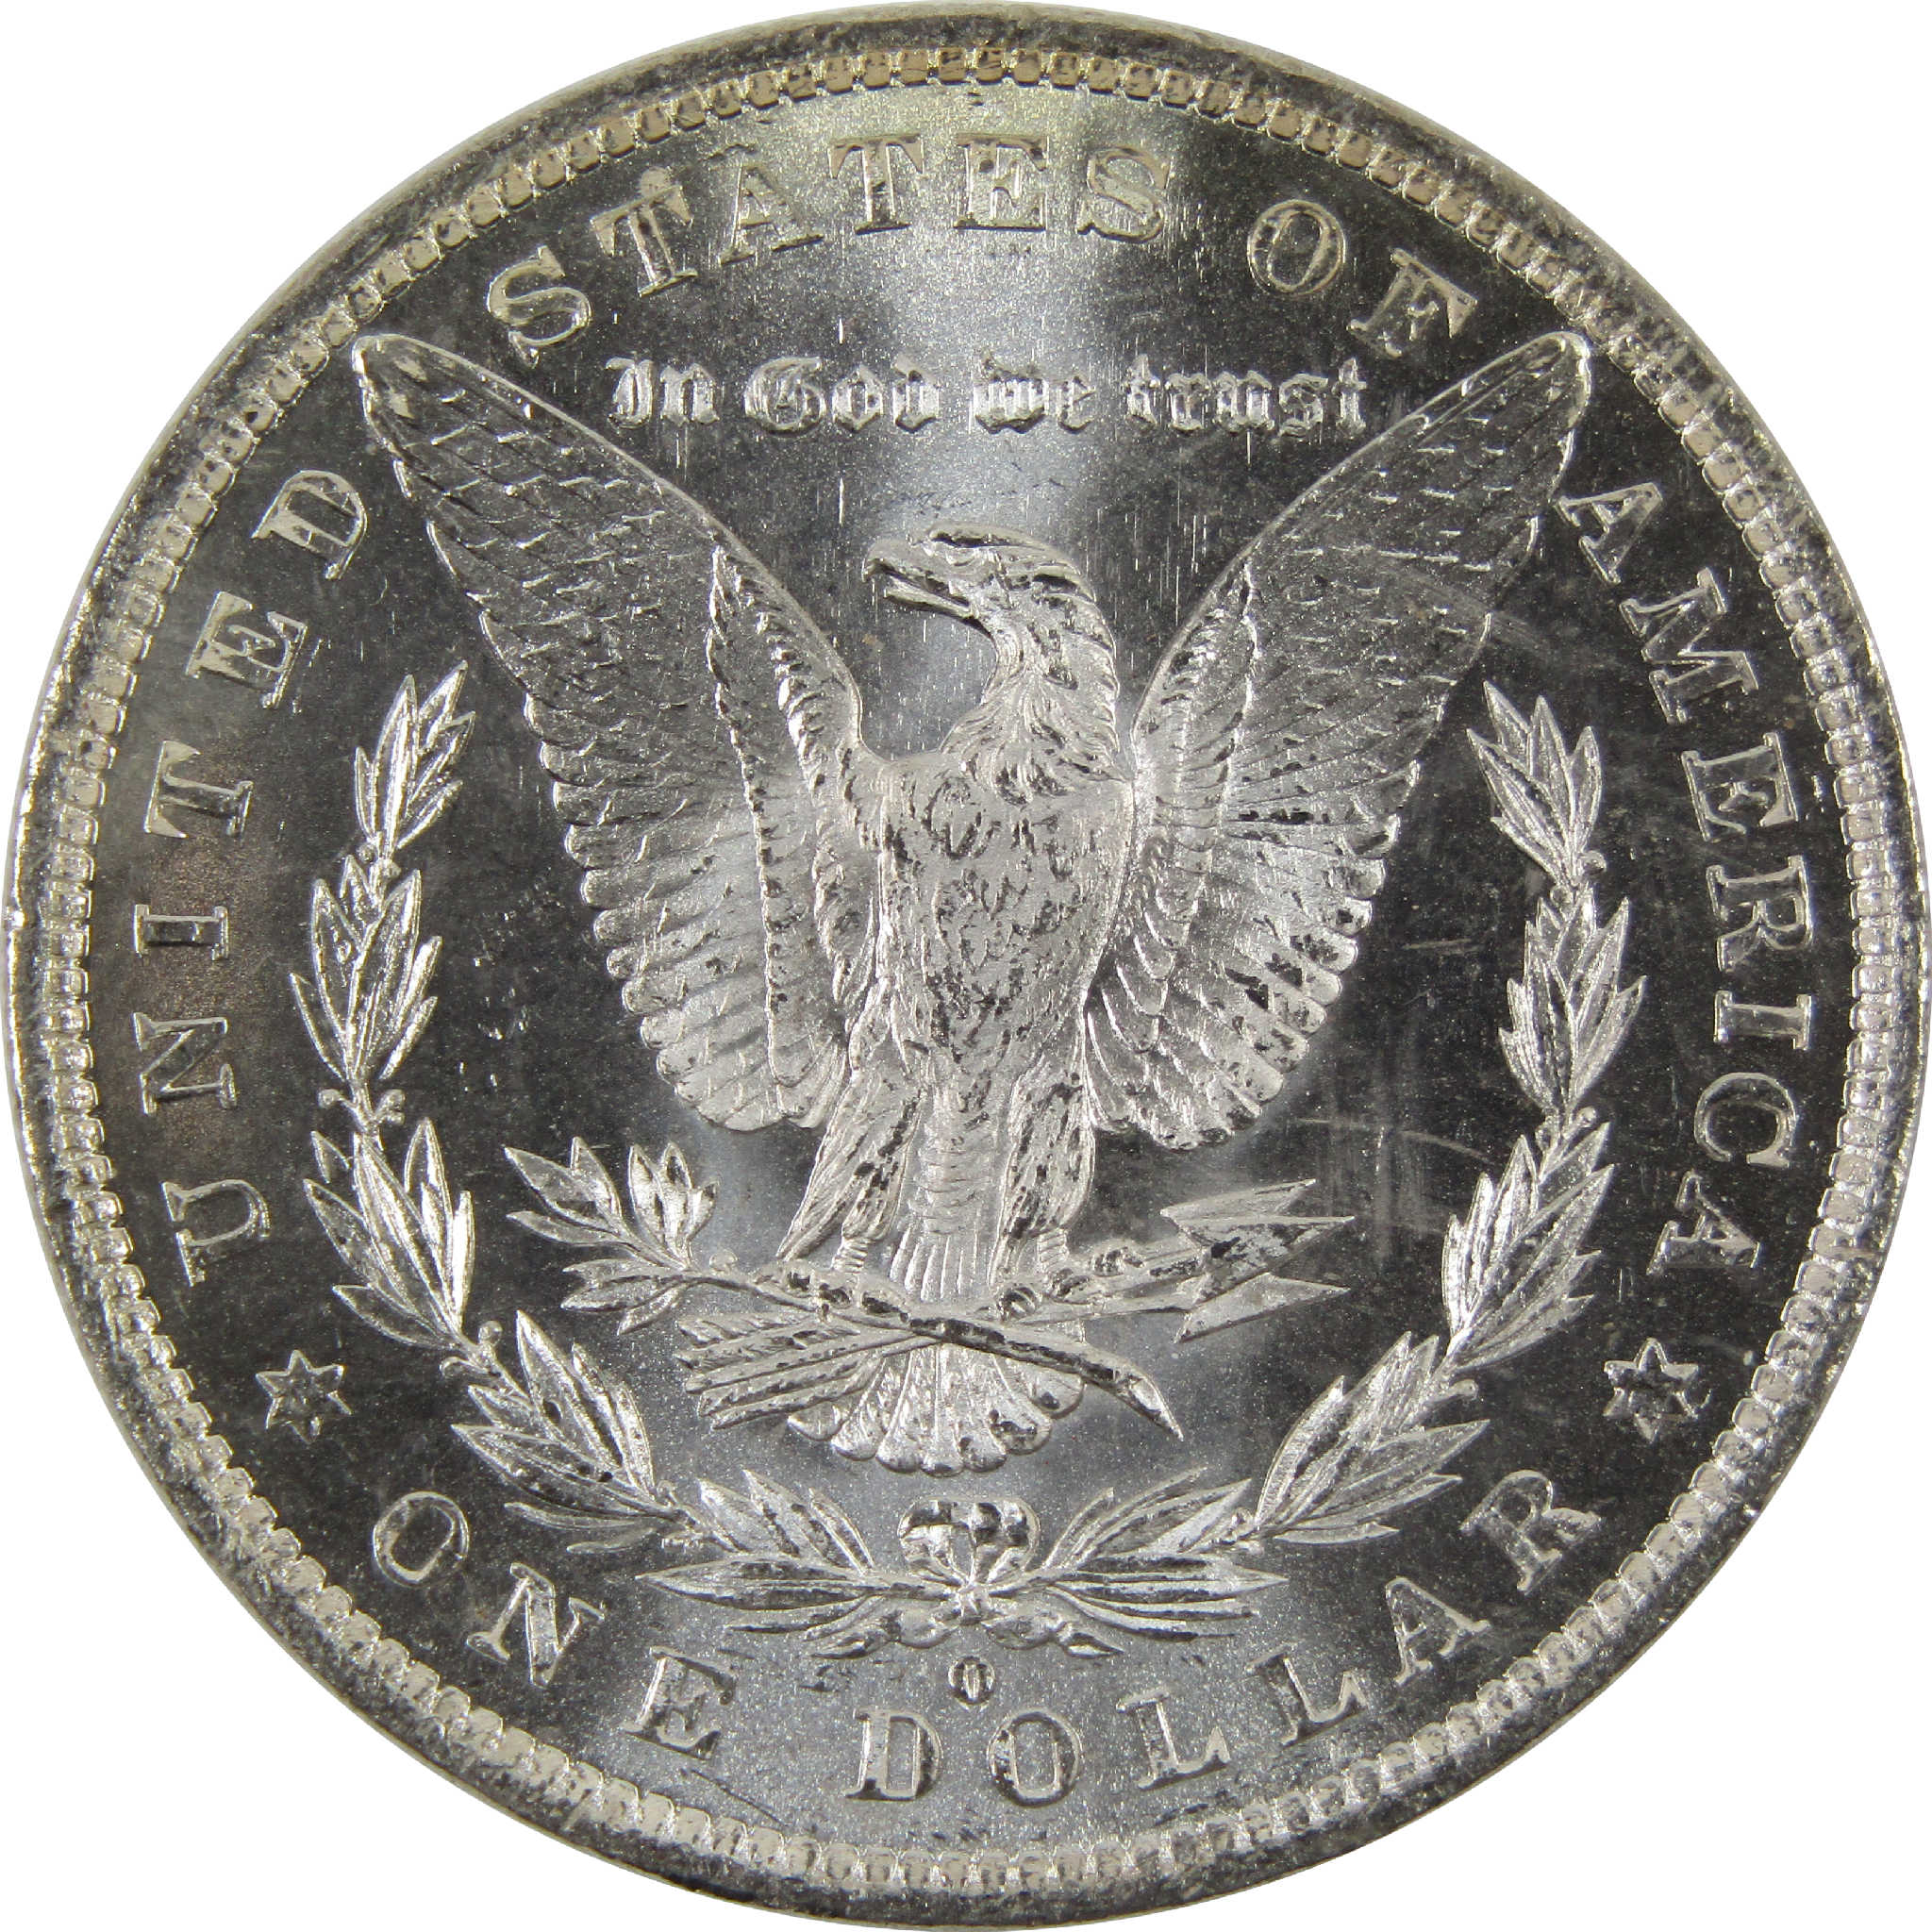 1882 O/O Morgan Dollar AU About Uncirculated 90% Silver $1 SKU:I8891 - Morgan coin - Morgan silver dollar - Morgan silver dollar for sale - Profile Coins &amp; Collectibles